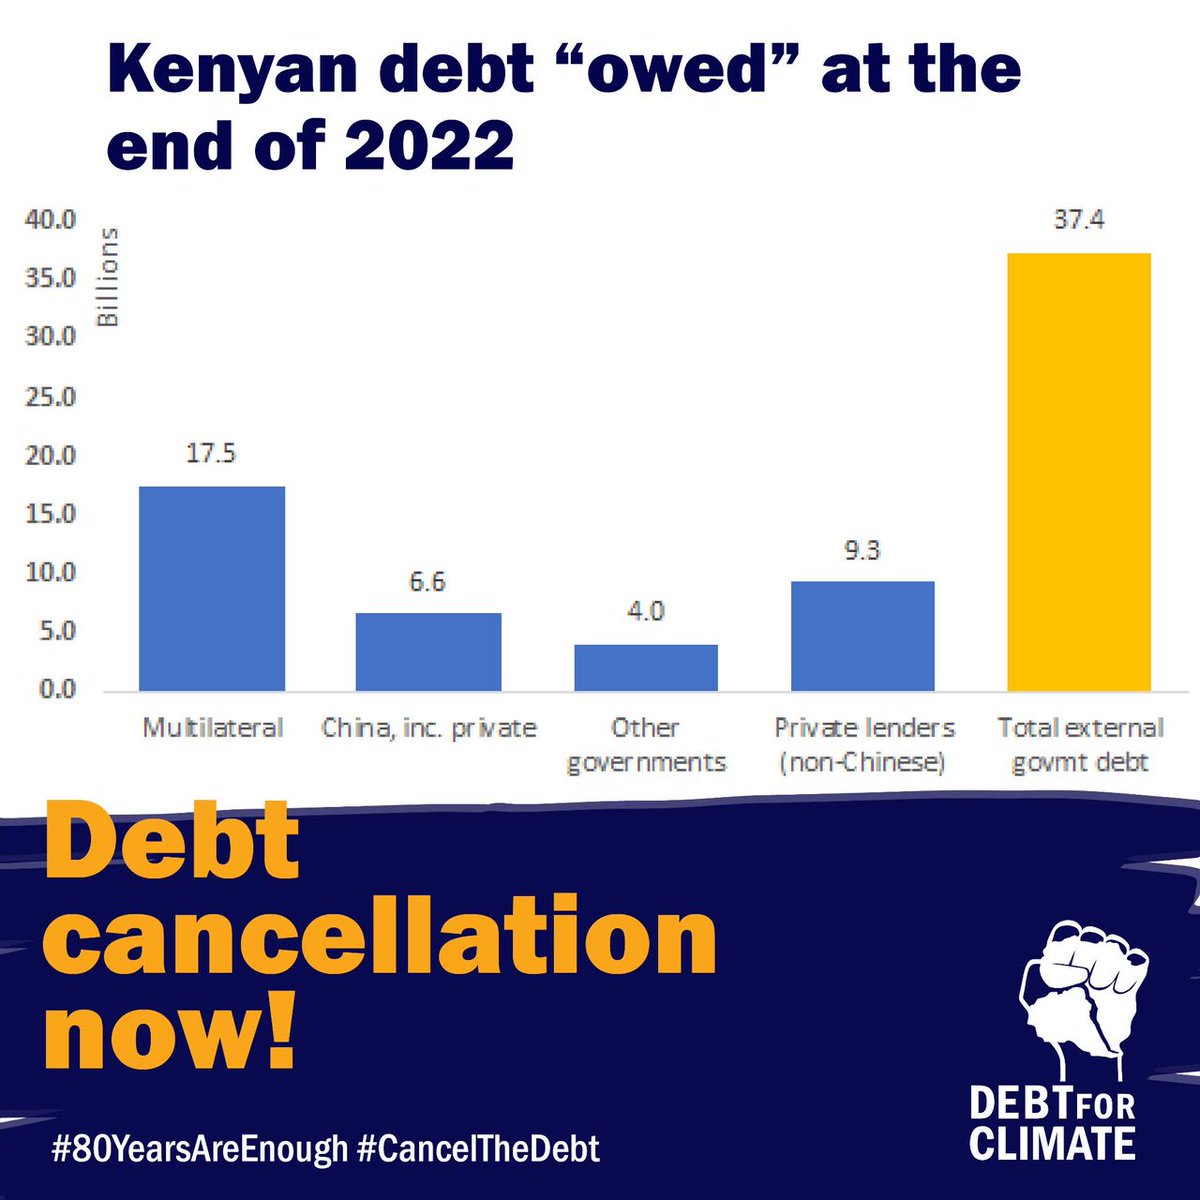 It's time to break the cycle! 
It's time for a clean slate.

Debt traps hamper the progress of developing nations, leaving us  vulnerable to climate shocks, and the adverse effects of climate change.

This is a plea to the Global North and institutions to 
#CanceltheDebt